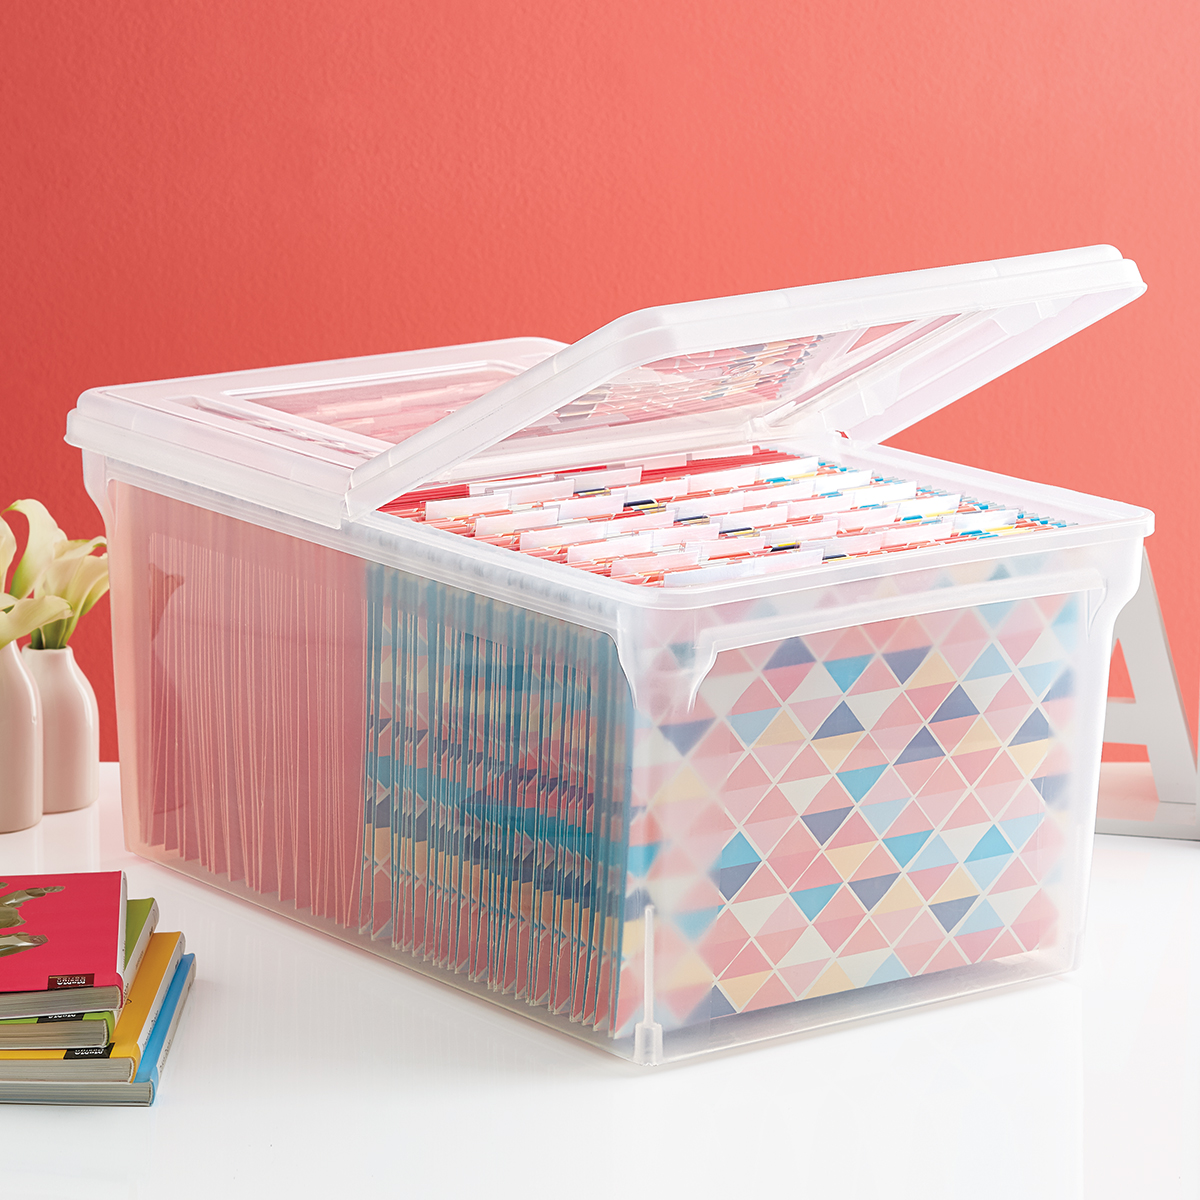 https://www.containerstore.com/catalogimages/331903/OF_15_Clear_Tote_R1209_CMYK.jpg